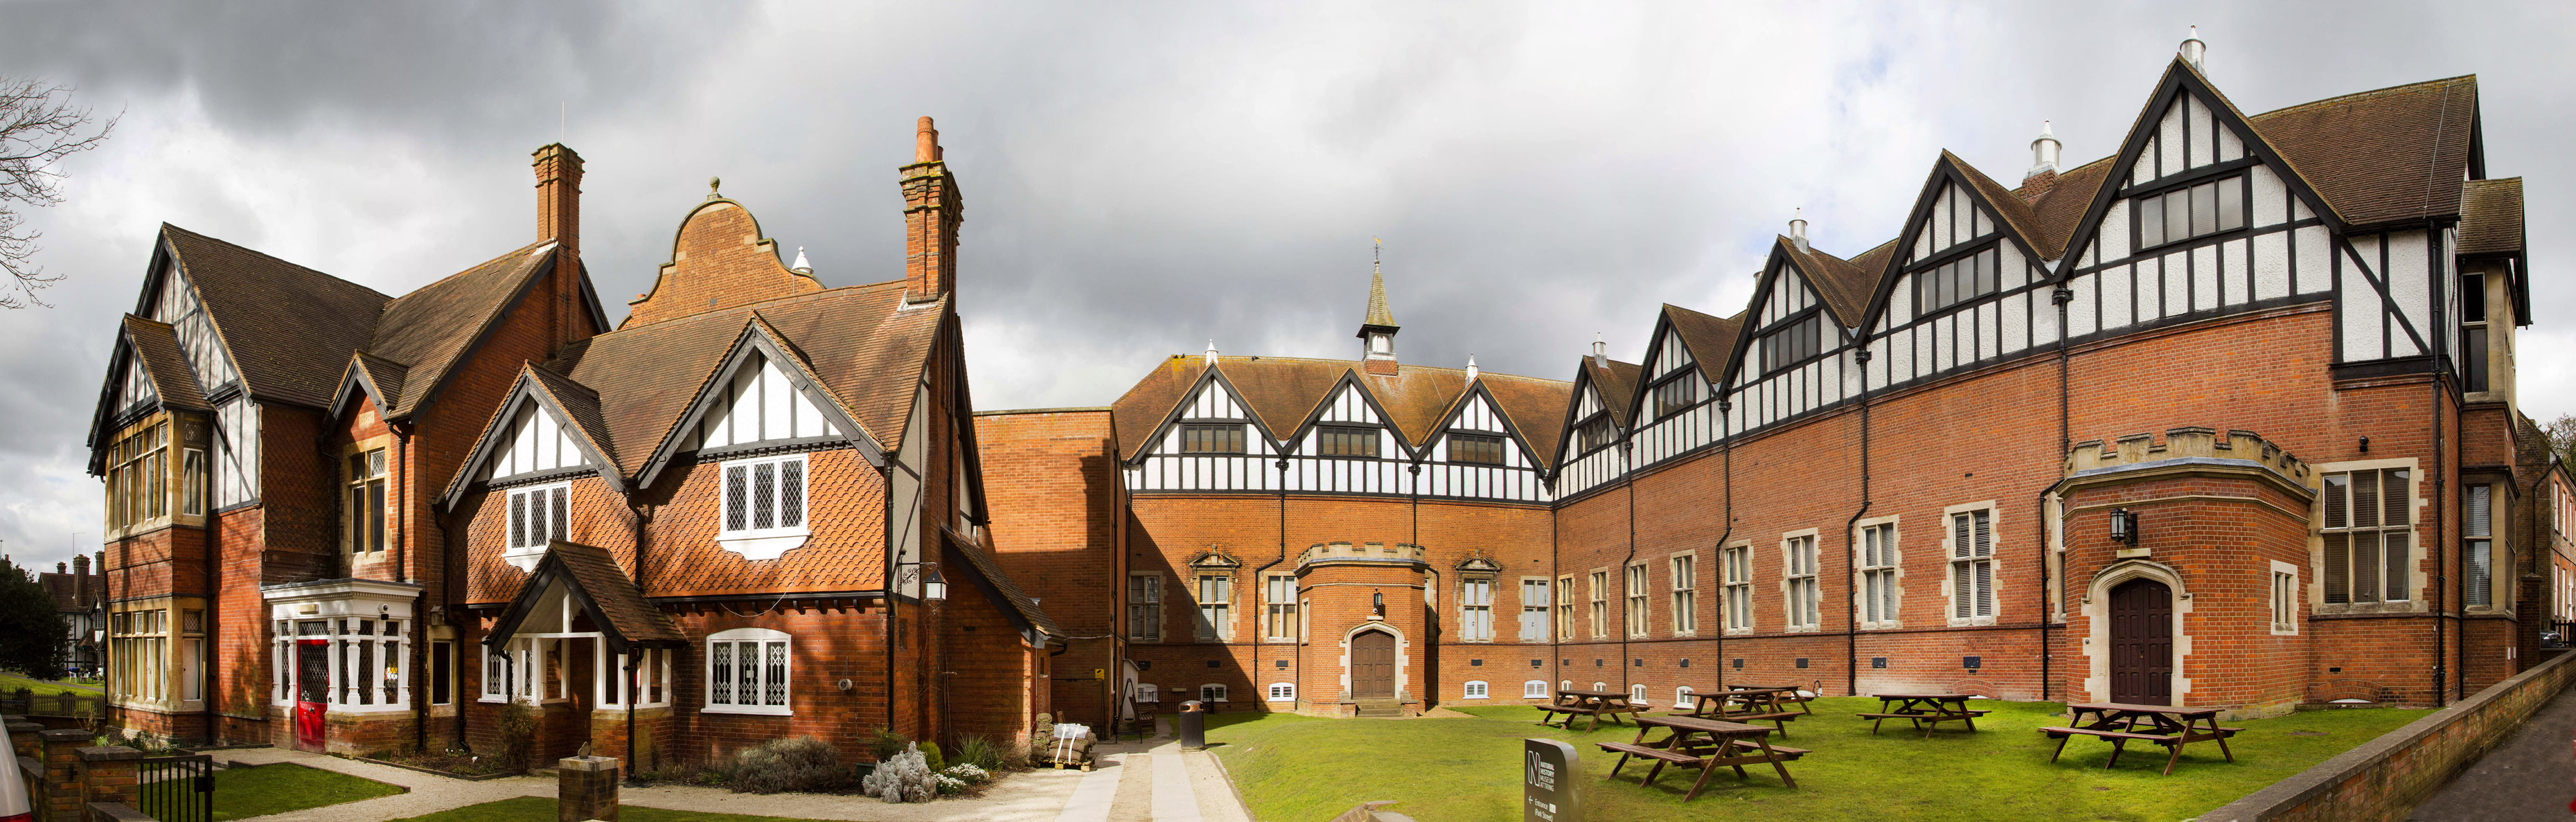 Natural History Museum at Tring ©Trustees of the Natural History Museum